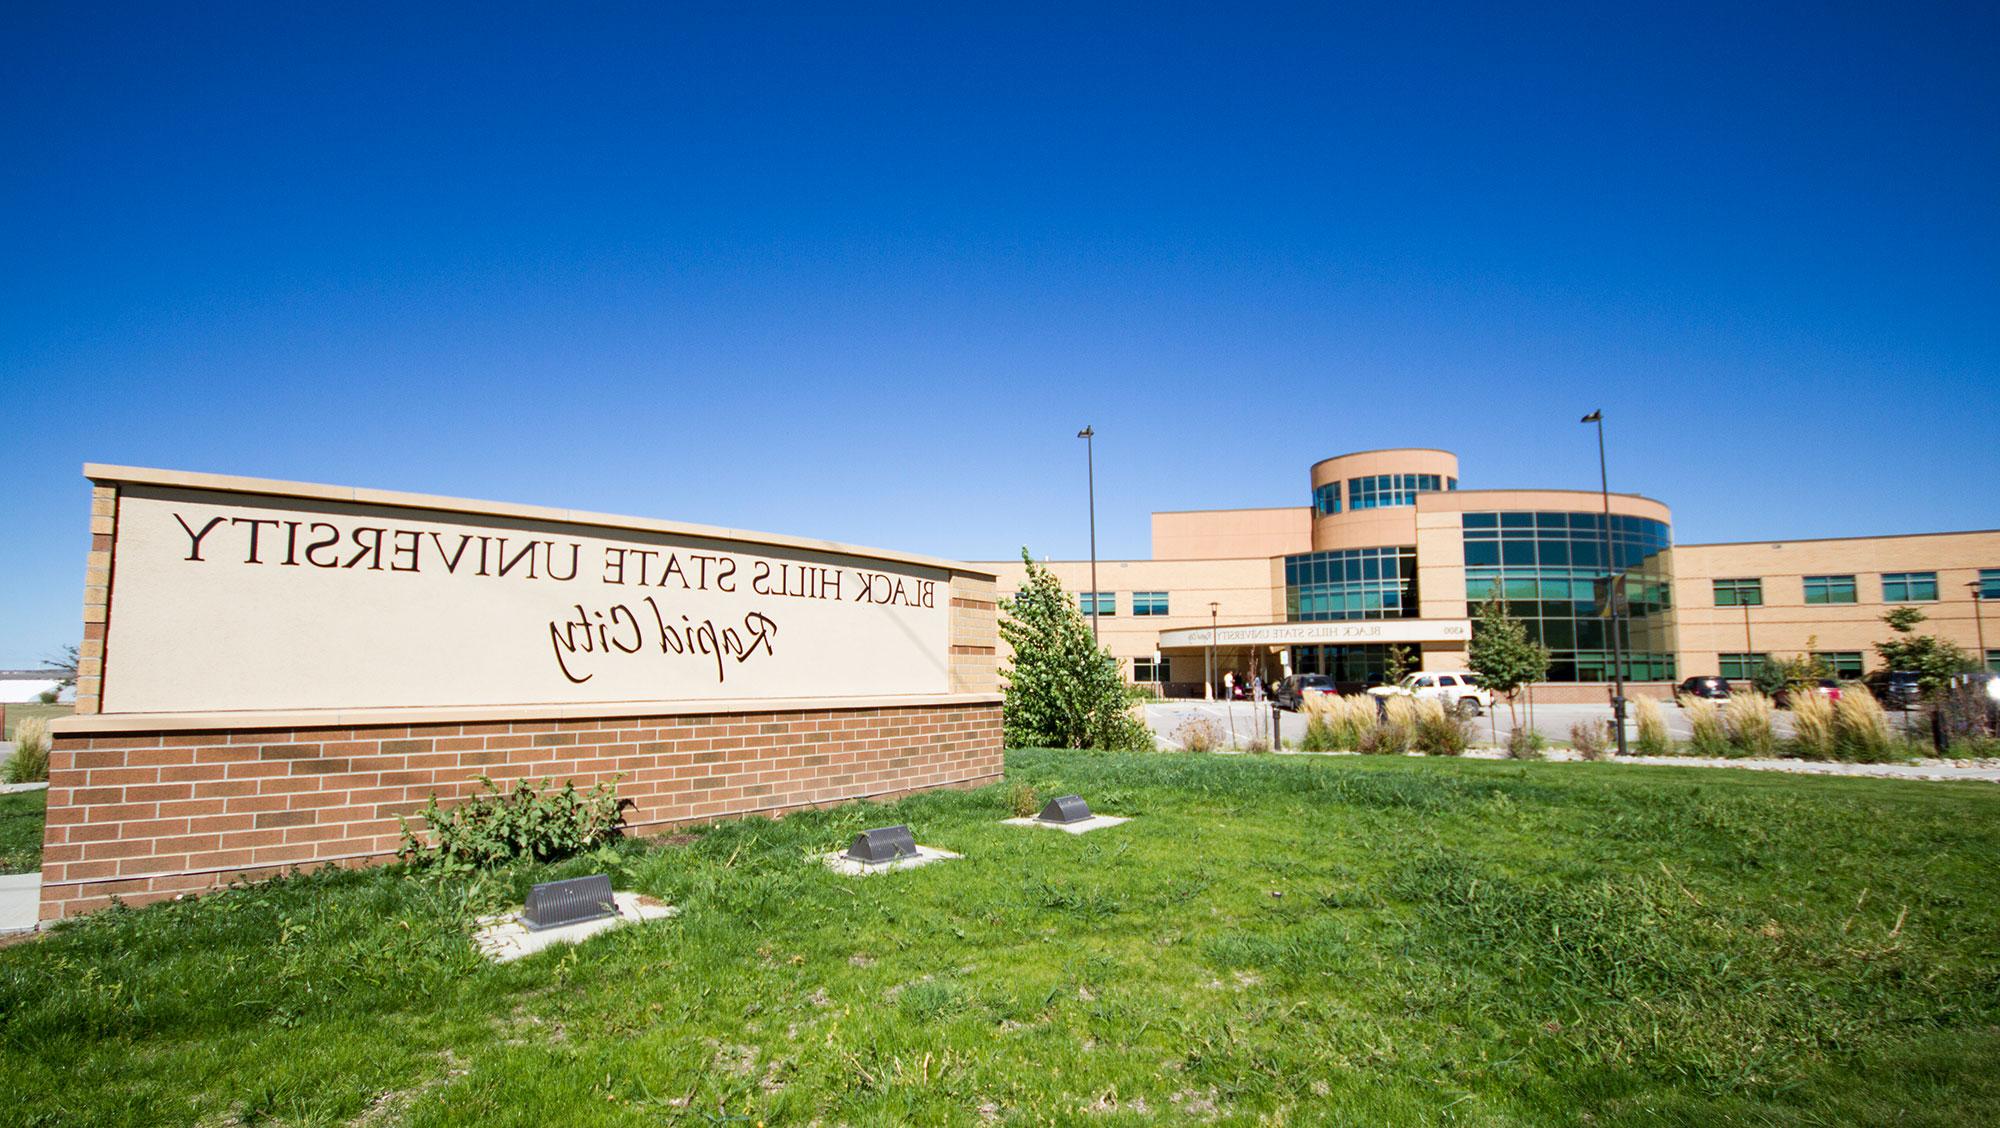 Image of BHSU-RC campus with green grass and sign.